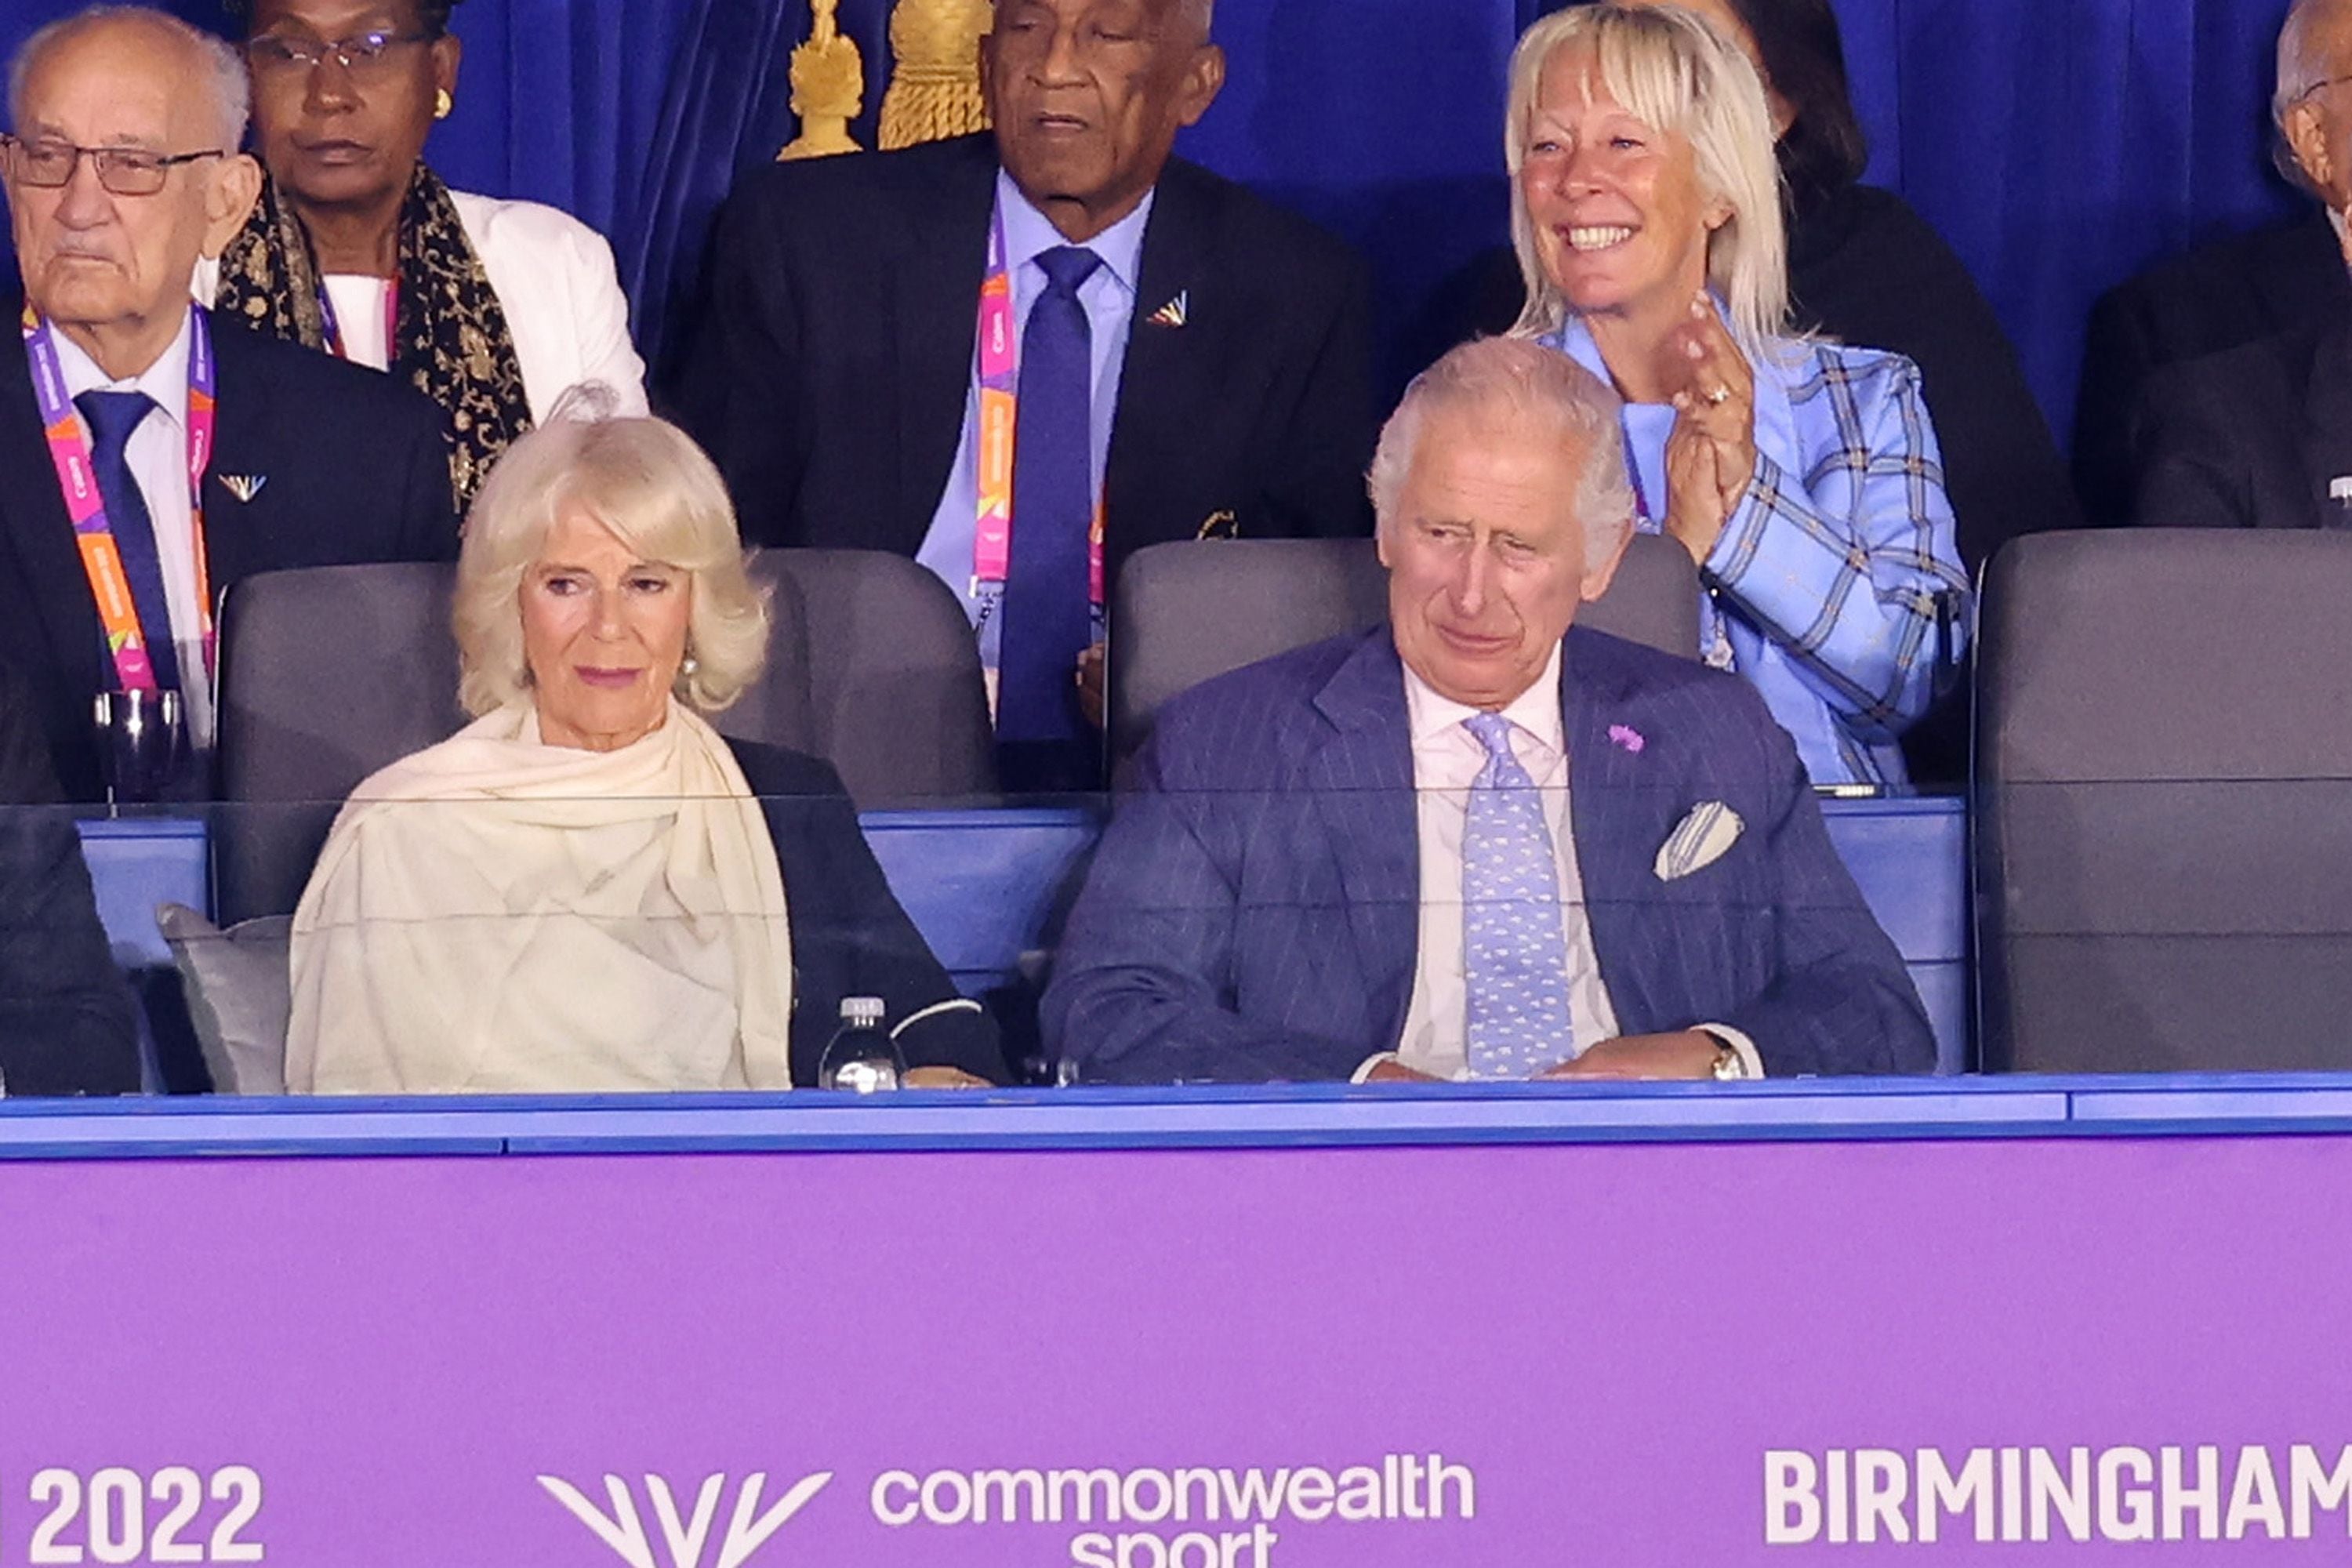 Prince Charles and Camilla, Duchess of Cornwall attend the Opening Ceremony of the 2022 Commonwealth Games